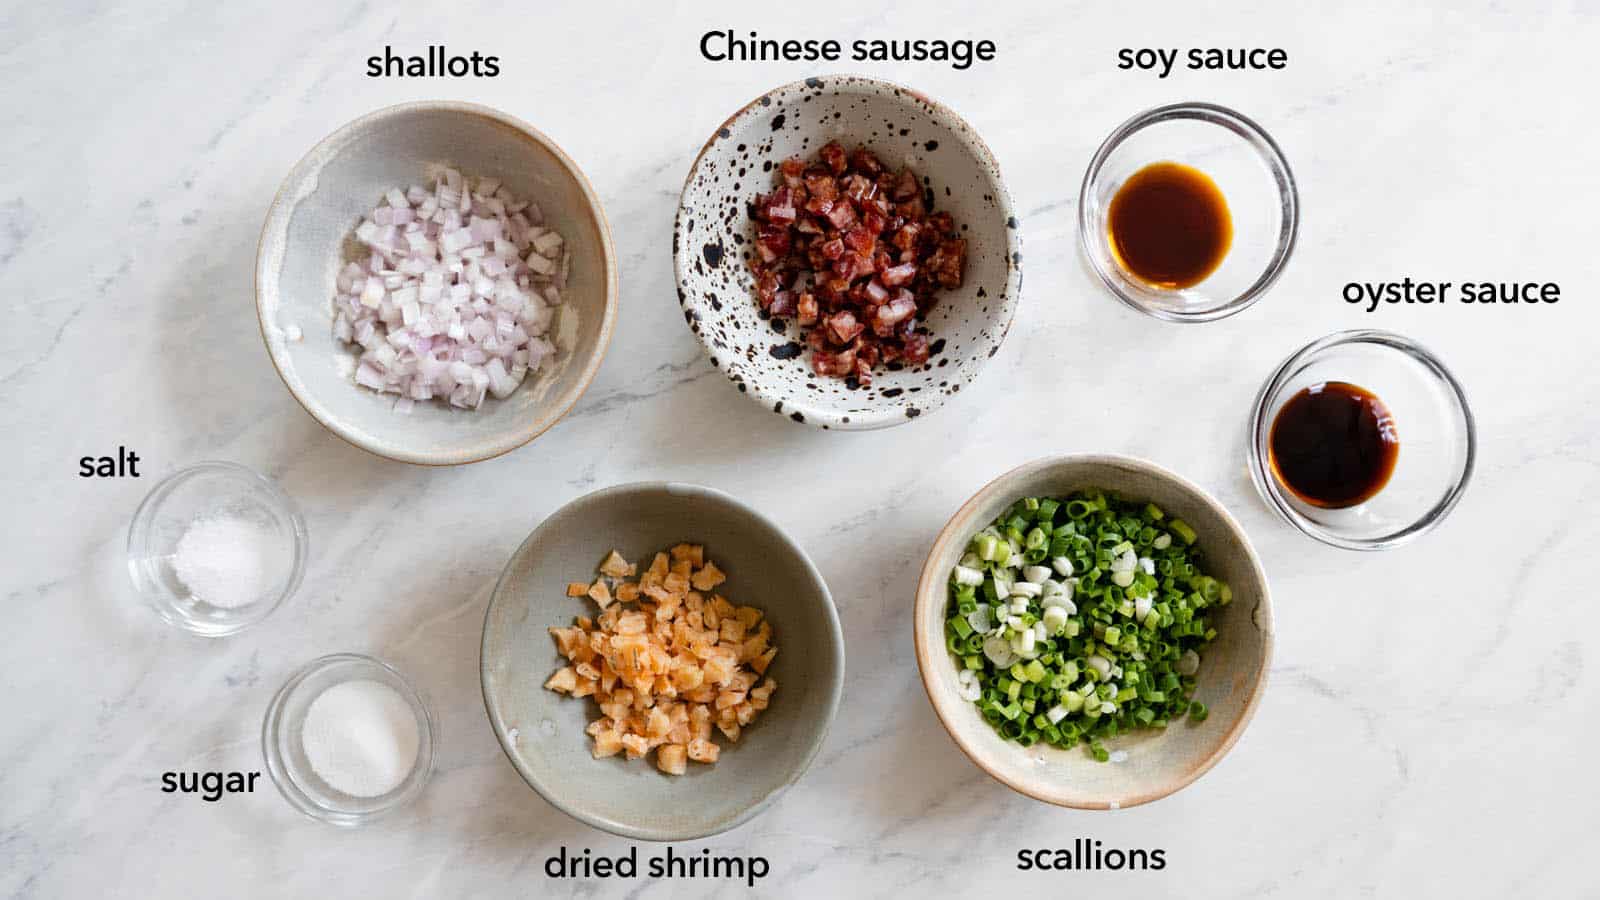 Flavoring bits for Chinese savory pancakes: shallots, dried shrimp, Chinese sausage, scallions, soy sauce, oyster sauce, salt, and sugar